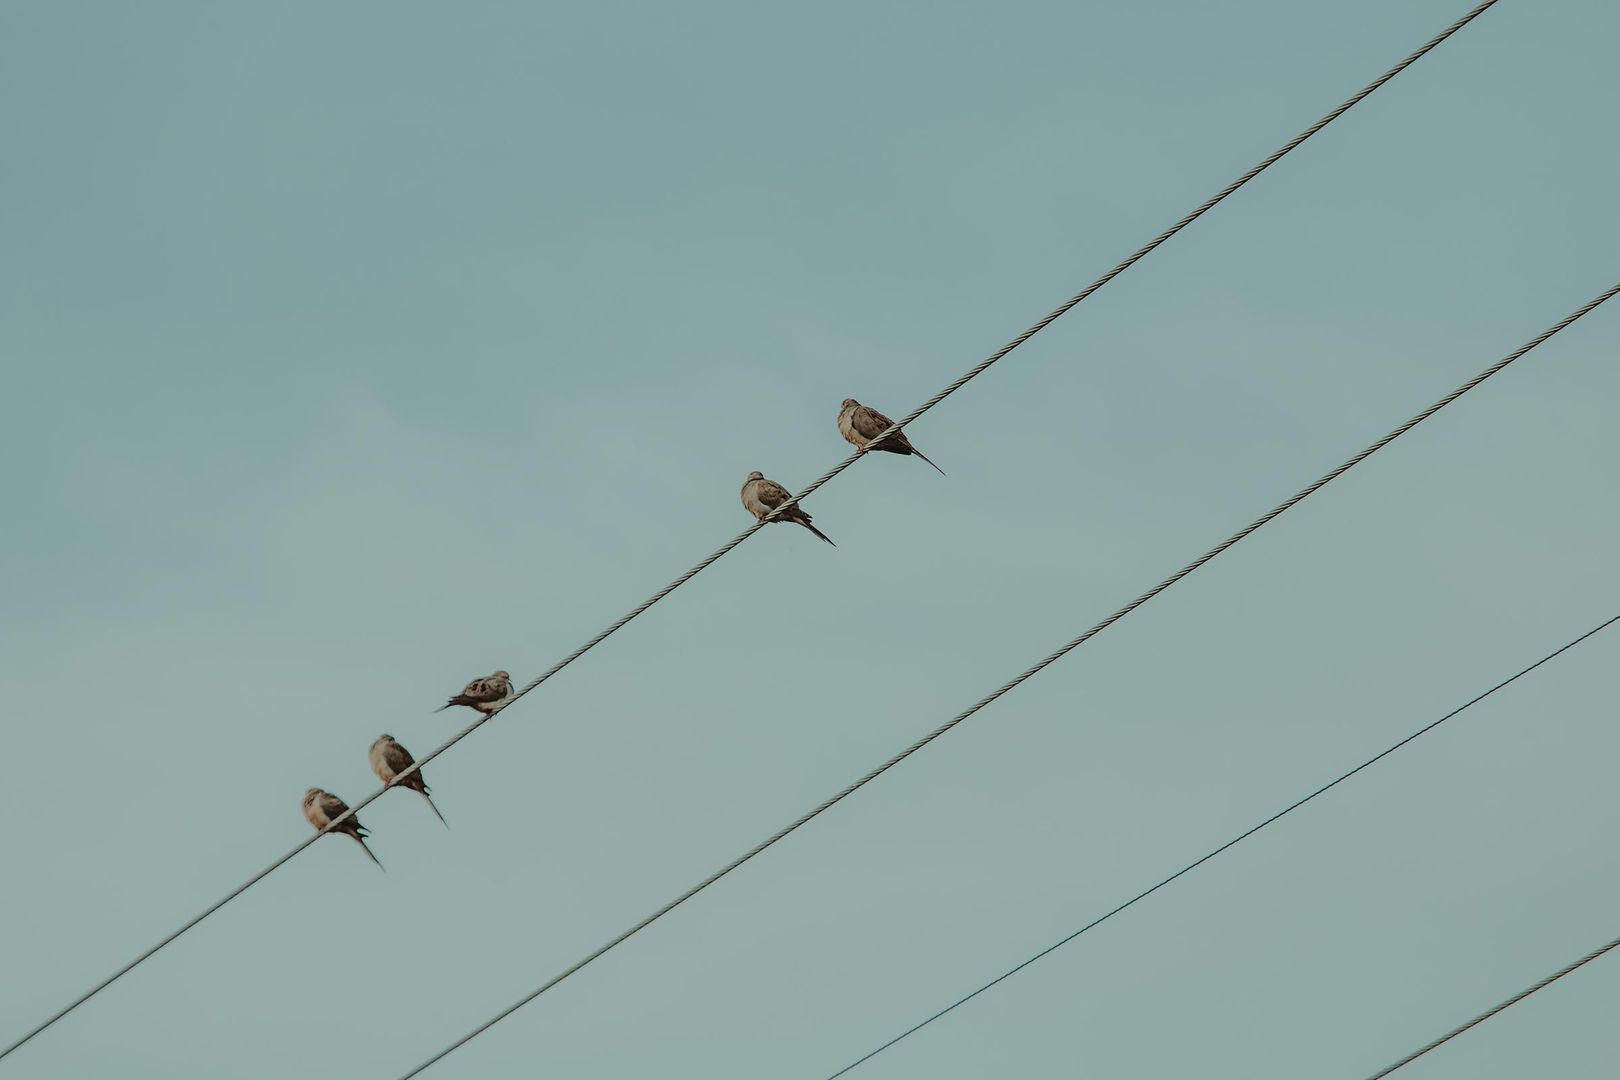 Birds are balancing on the electricity grid.